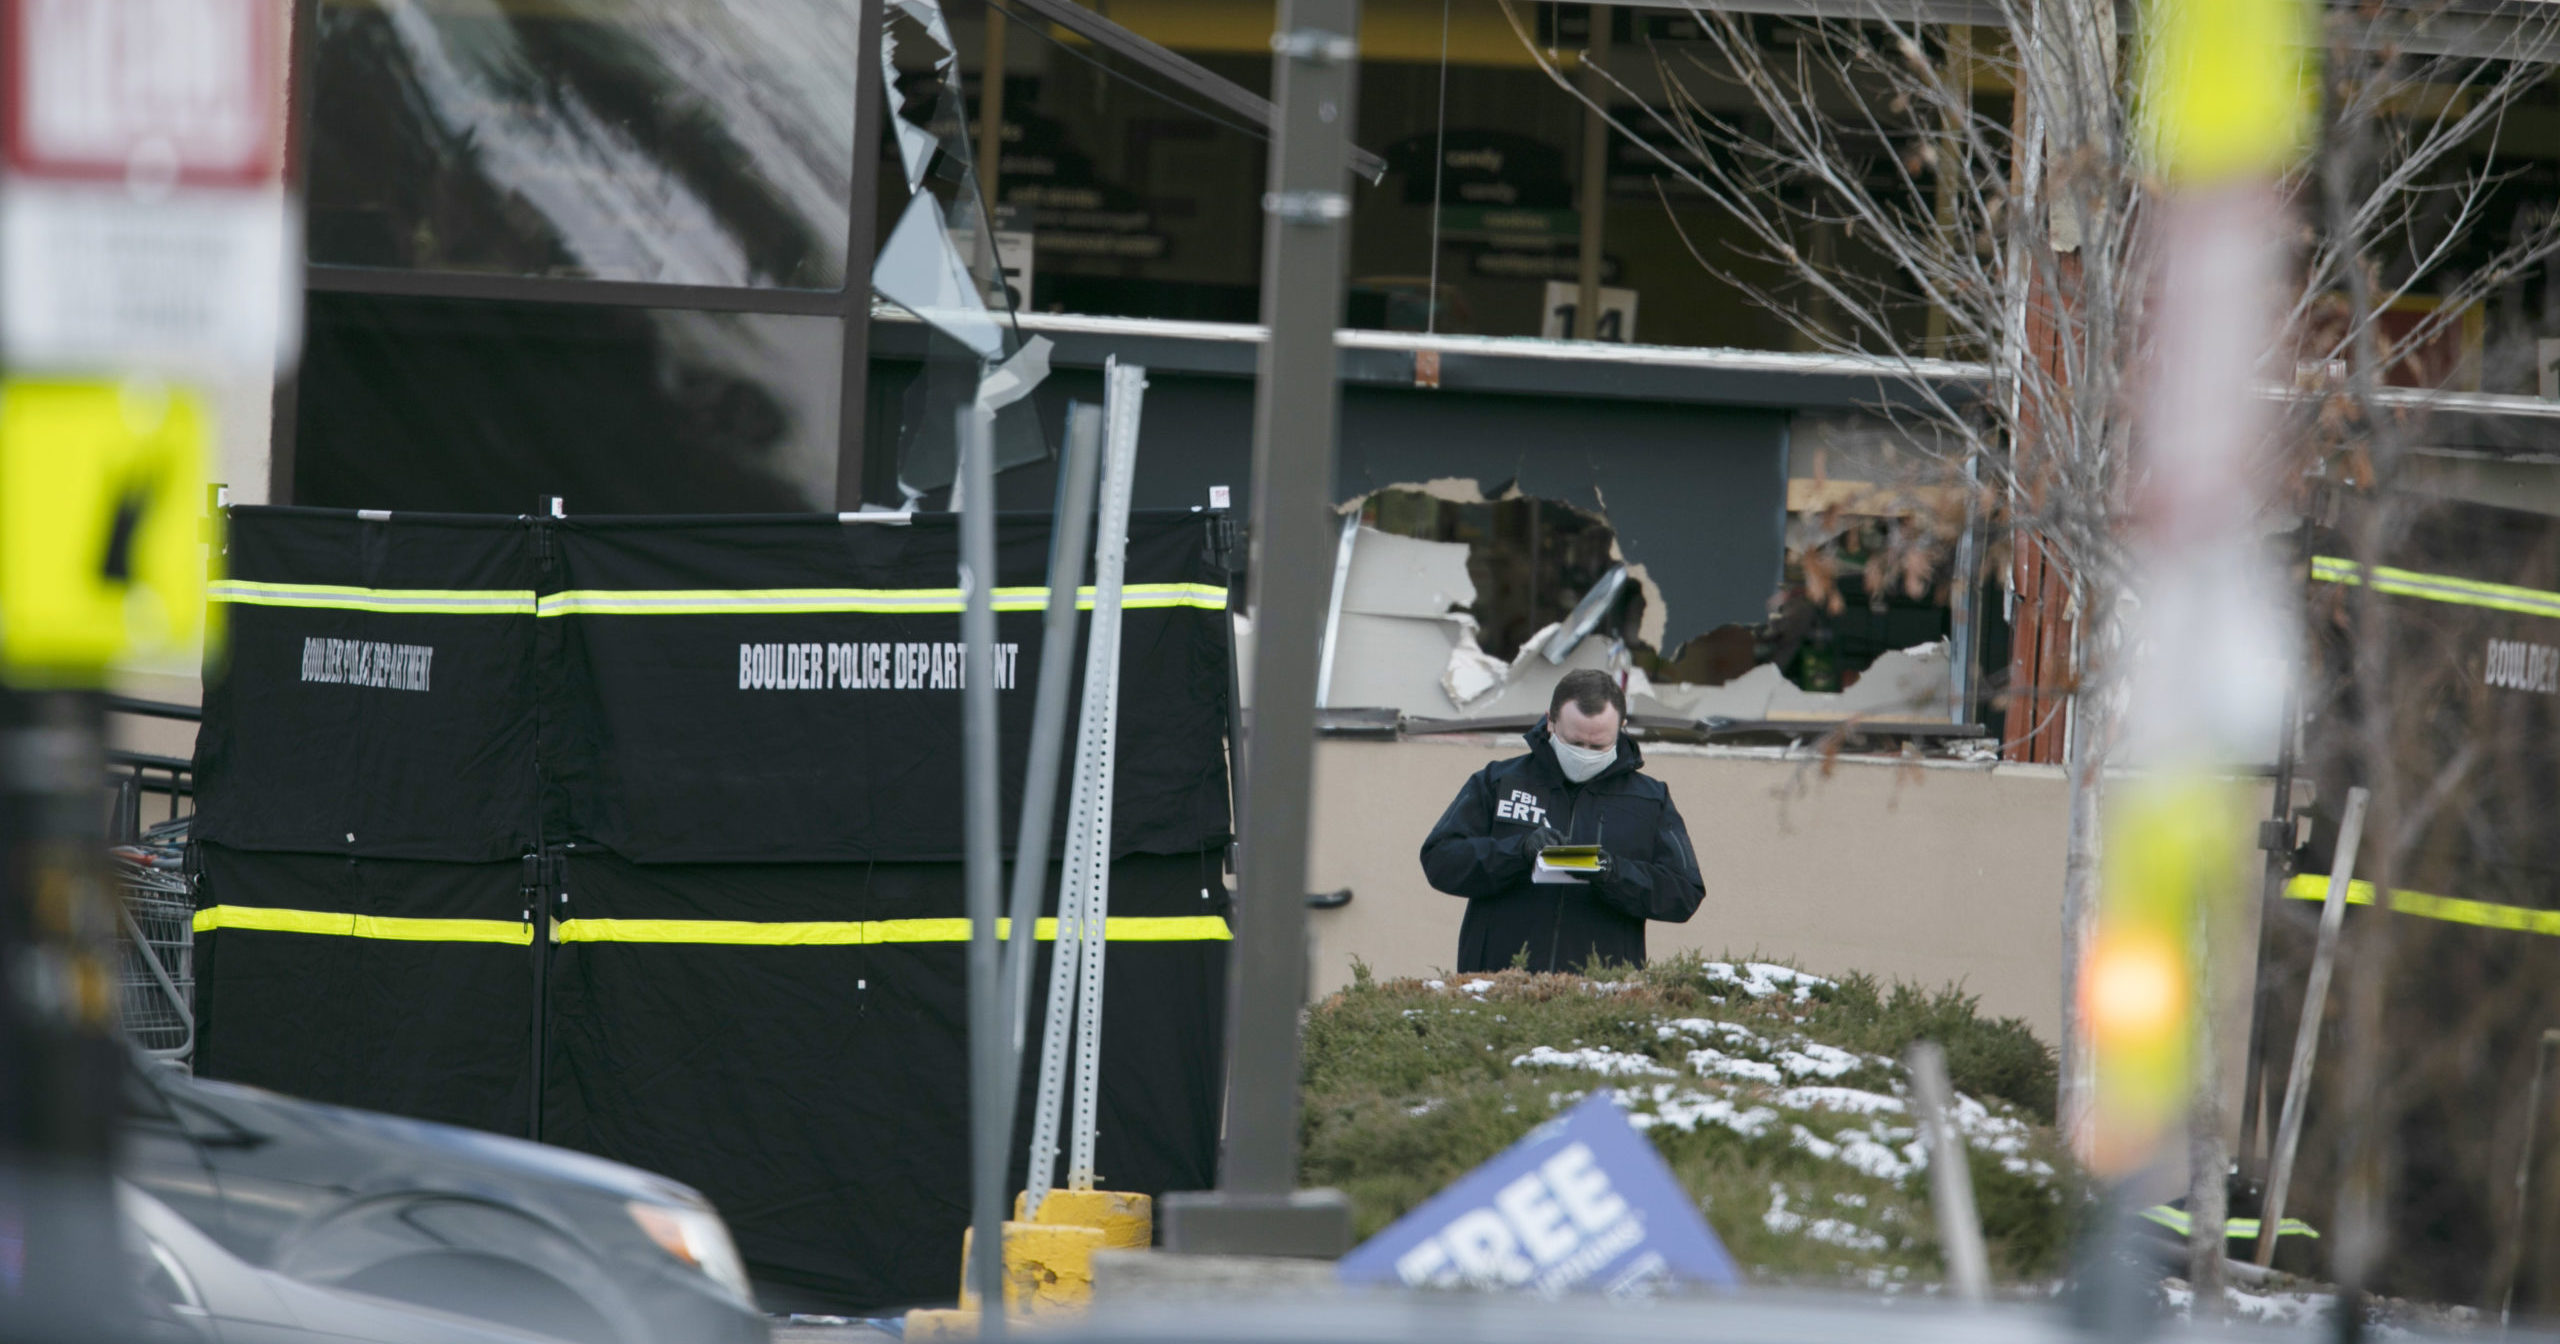 Police work on the scene outside of a King Soopers grocery store in Boulder, Colorado, where authorities say 10 people were killed in a shooting Monday.